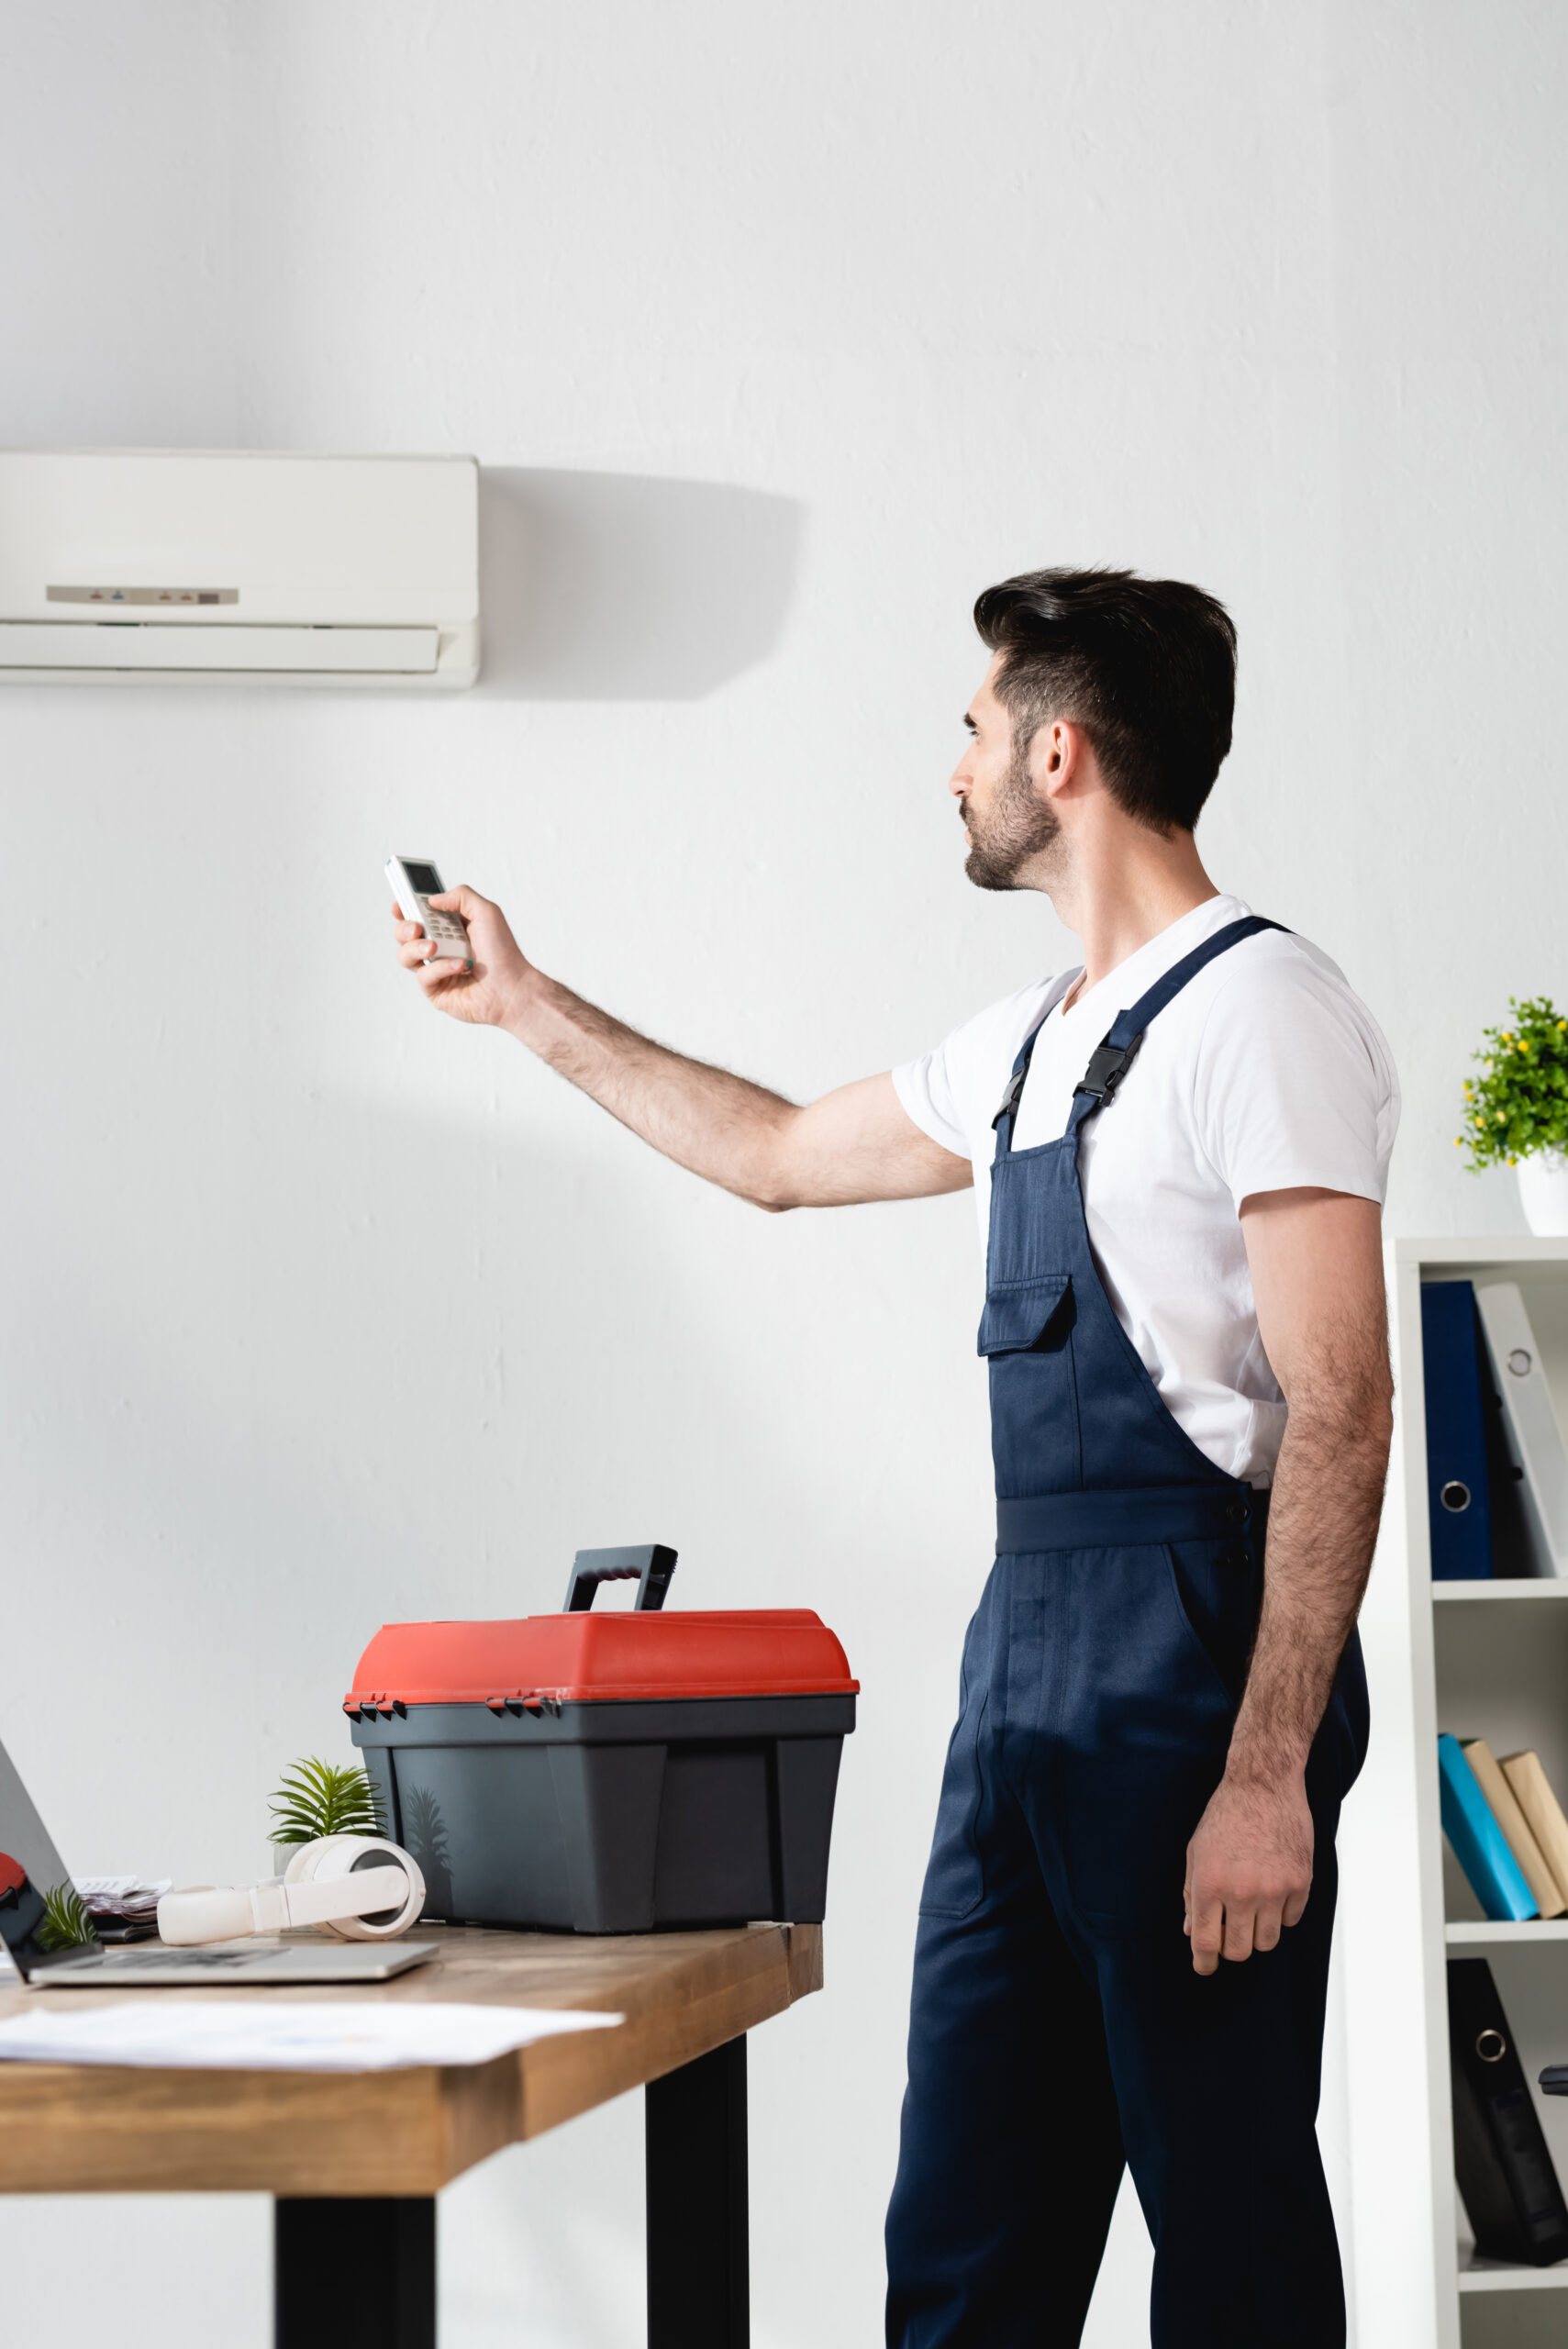 repairman using air conditioner remote controller while standing near toolbox